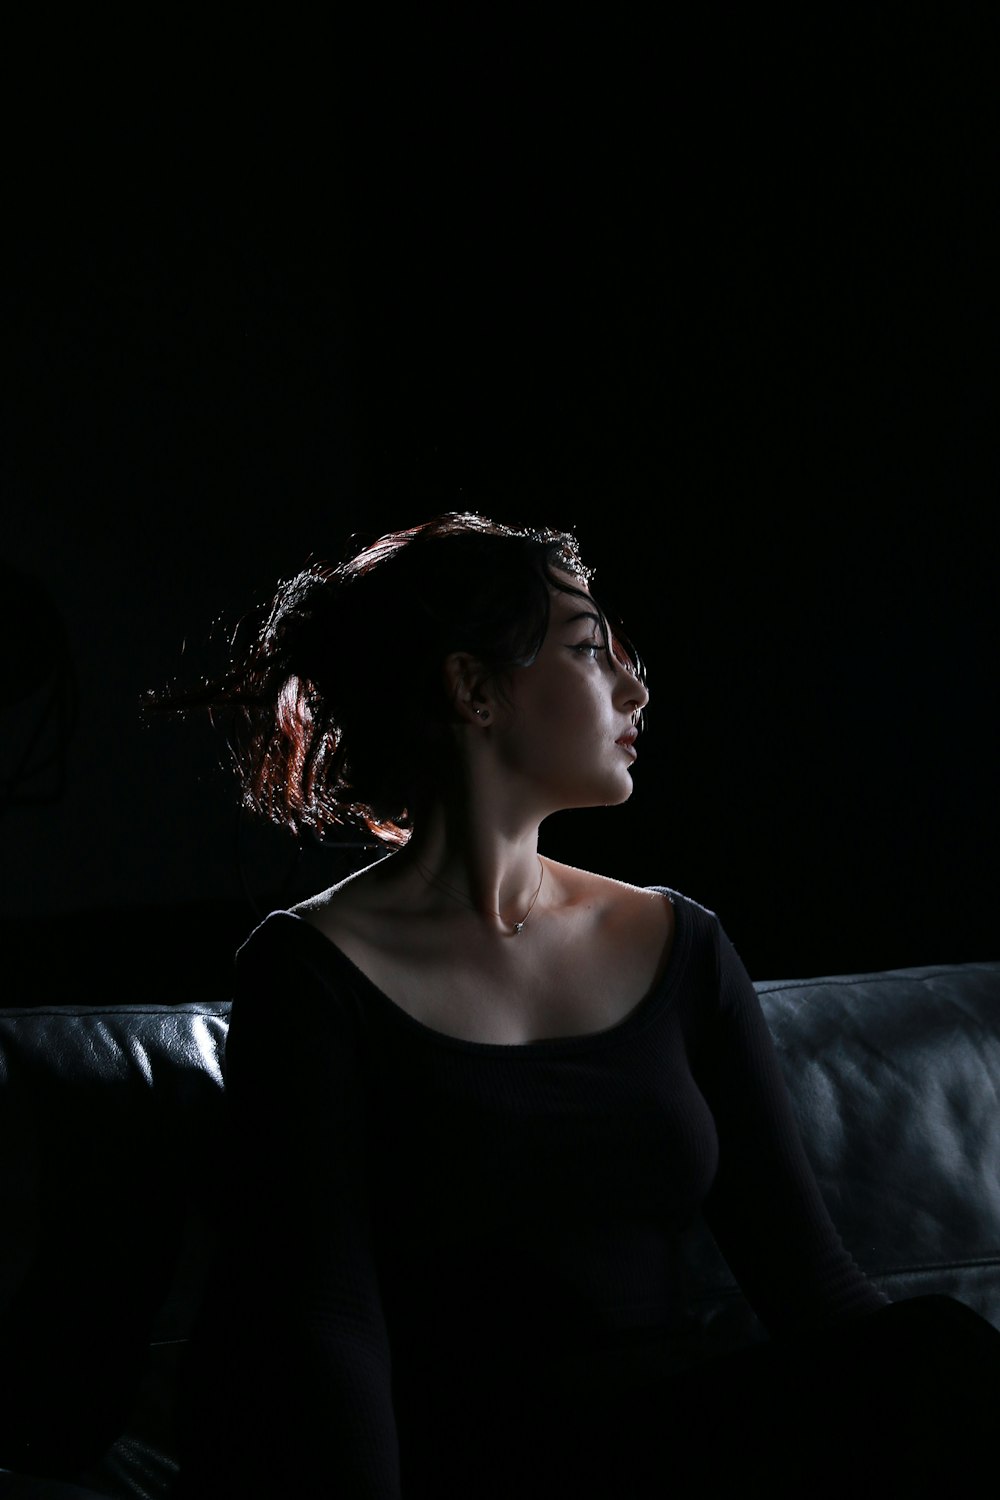 a woman sitting on a couch in the dark